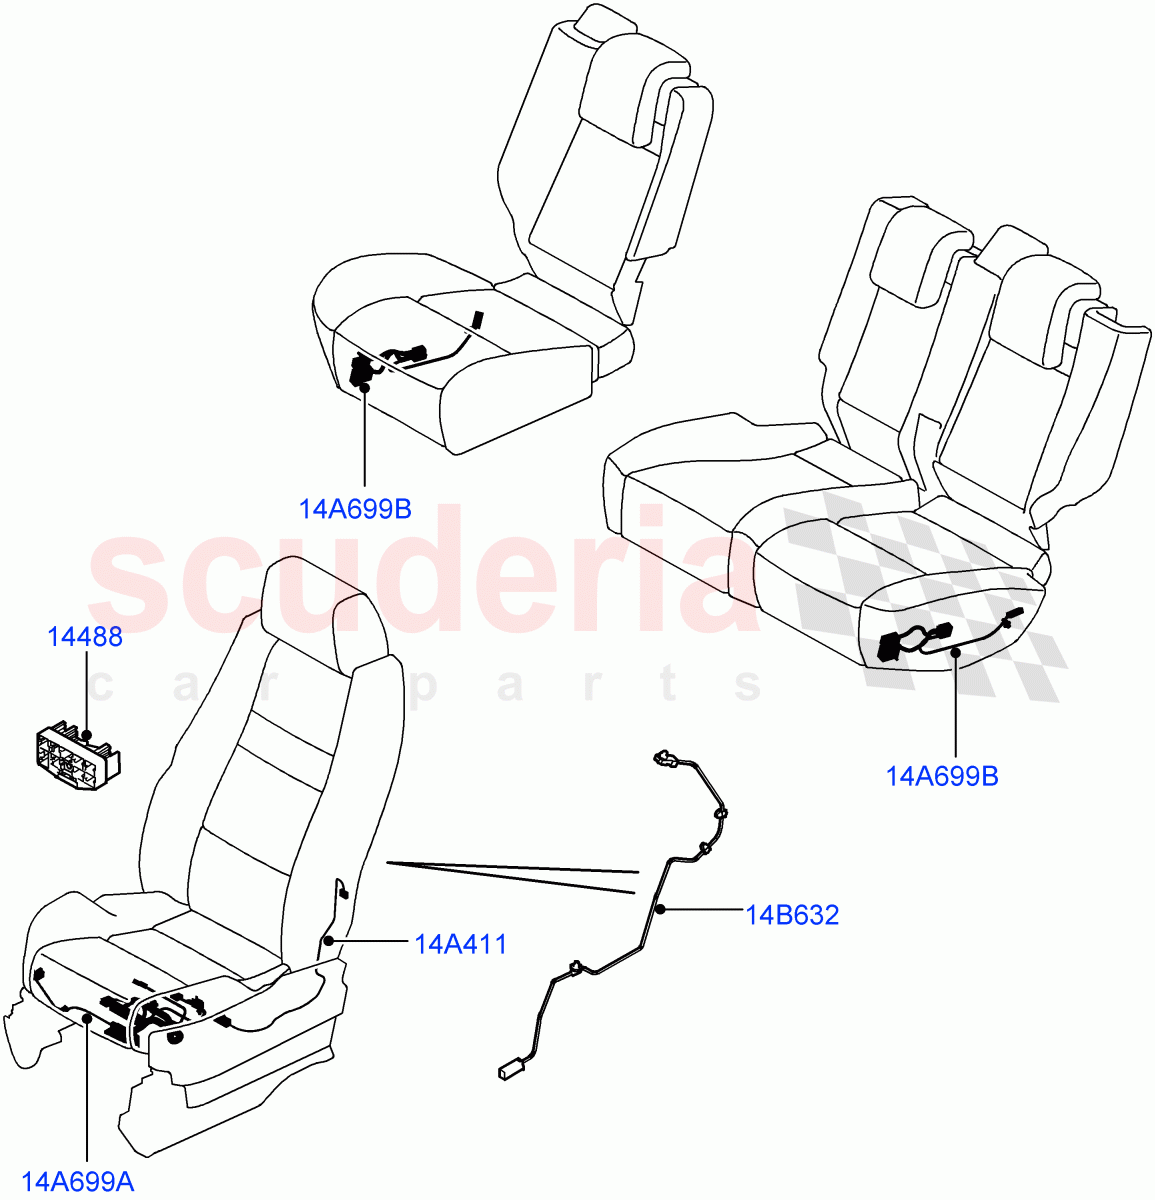 Electrical Wiring - Body And Rear(Seats)((V)TO9A999999) of Land Rover Land Rover Range Rover Sport (2005-2009) [3.6 V8 32V DOHC EFI Diesel]